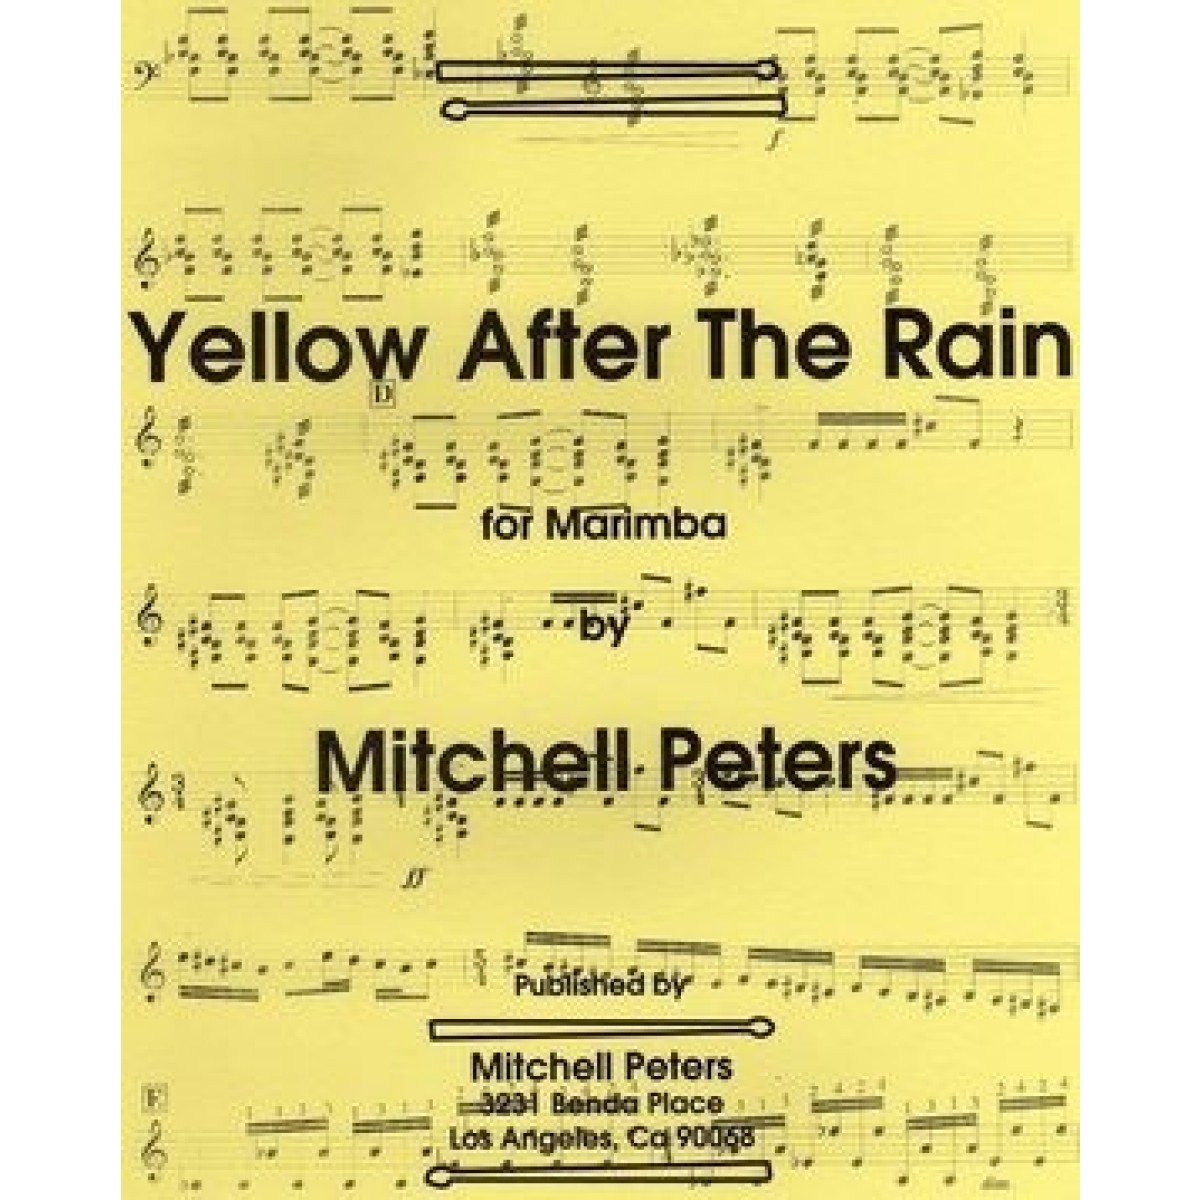 Yellow After The Rain by Mitchell Peters